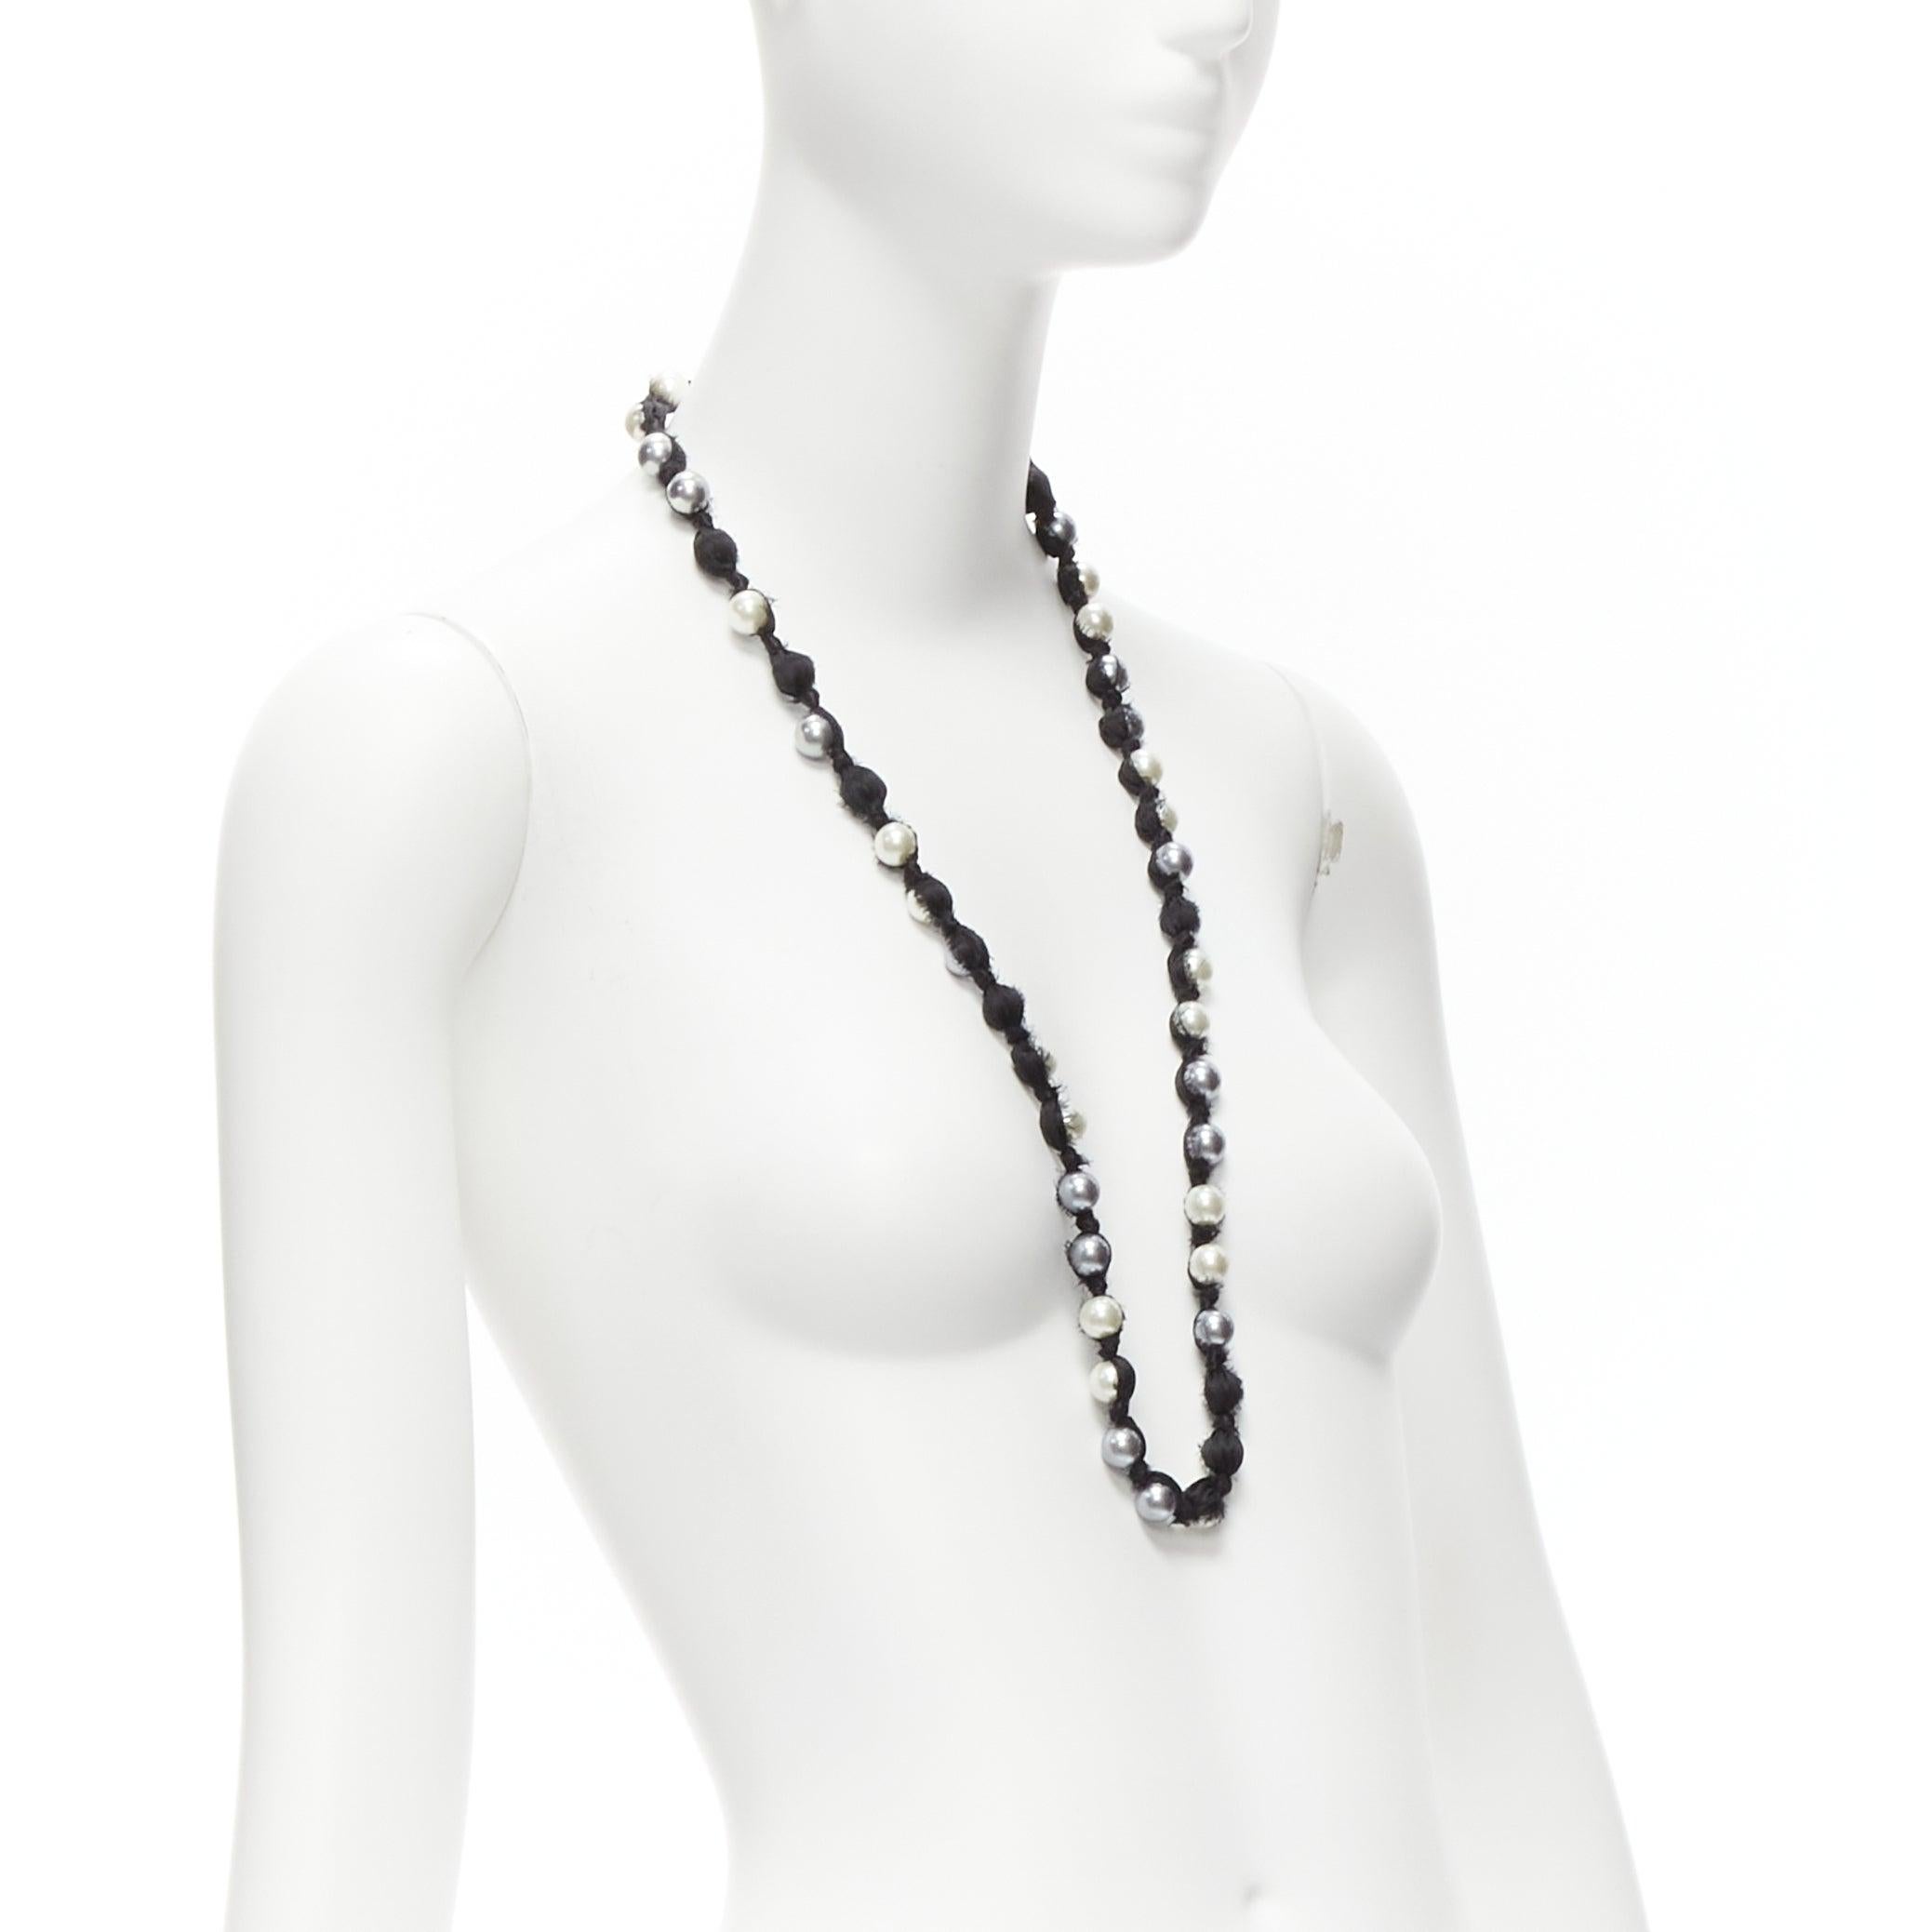 LANVIN ALBER ELBAZ cream charcoal black pearl silk ribbon wrapped long necklace In Excellent Condition For Sale In Hong Kong, NT